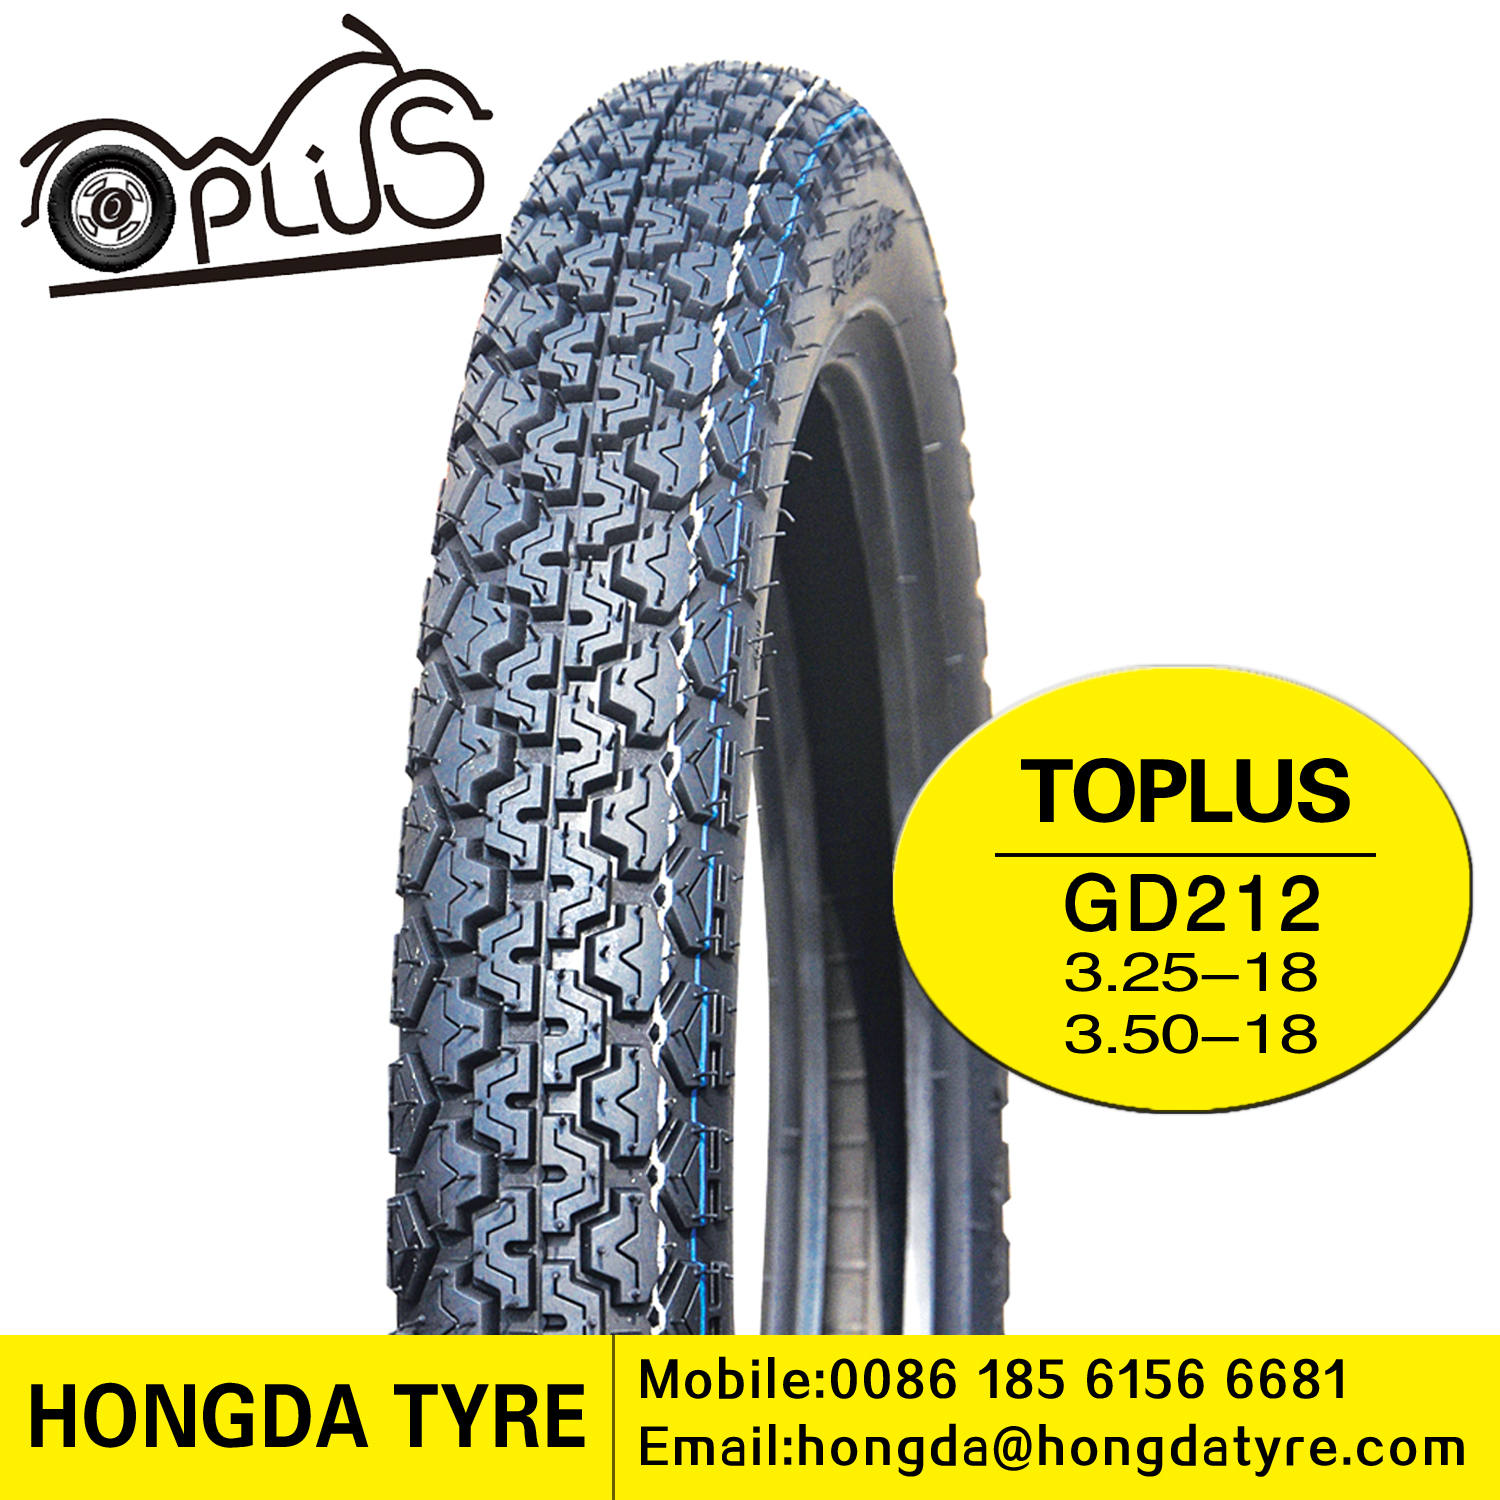 Motorcycle tyre GD212